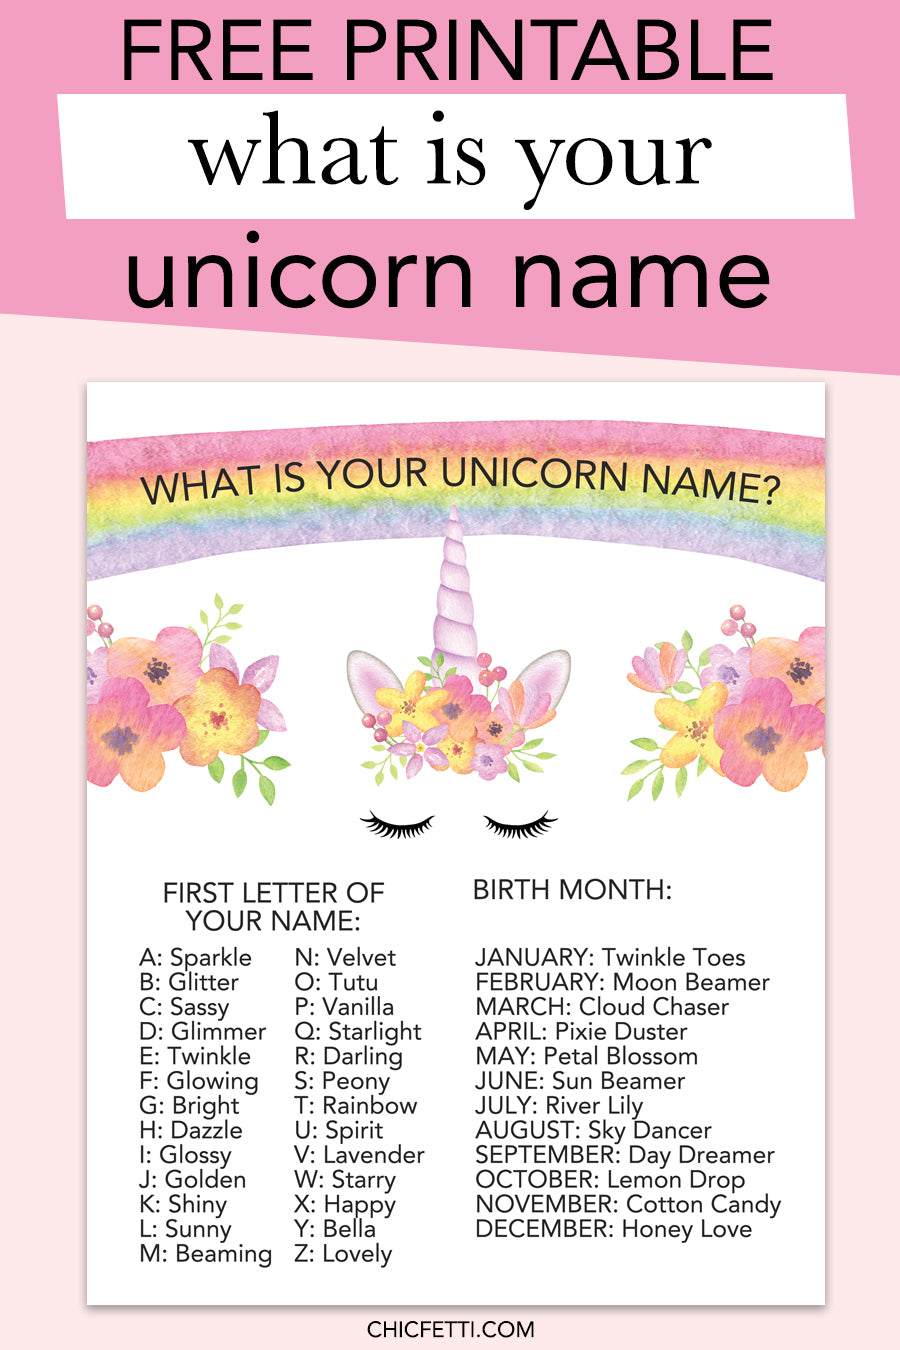 what is your unicorn name free printable chicfetti